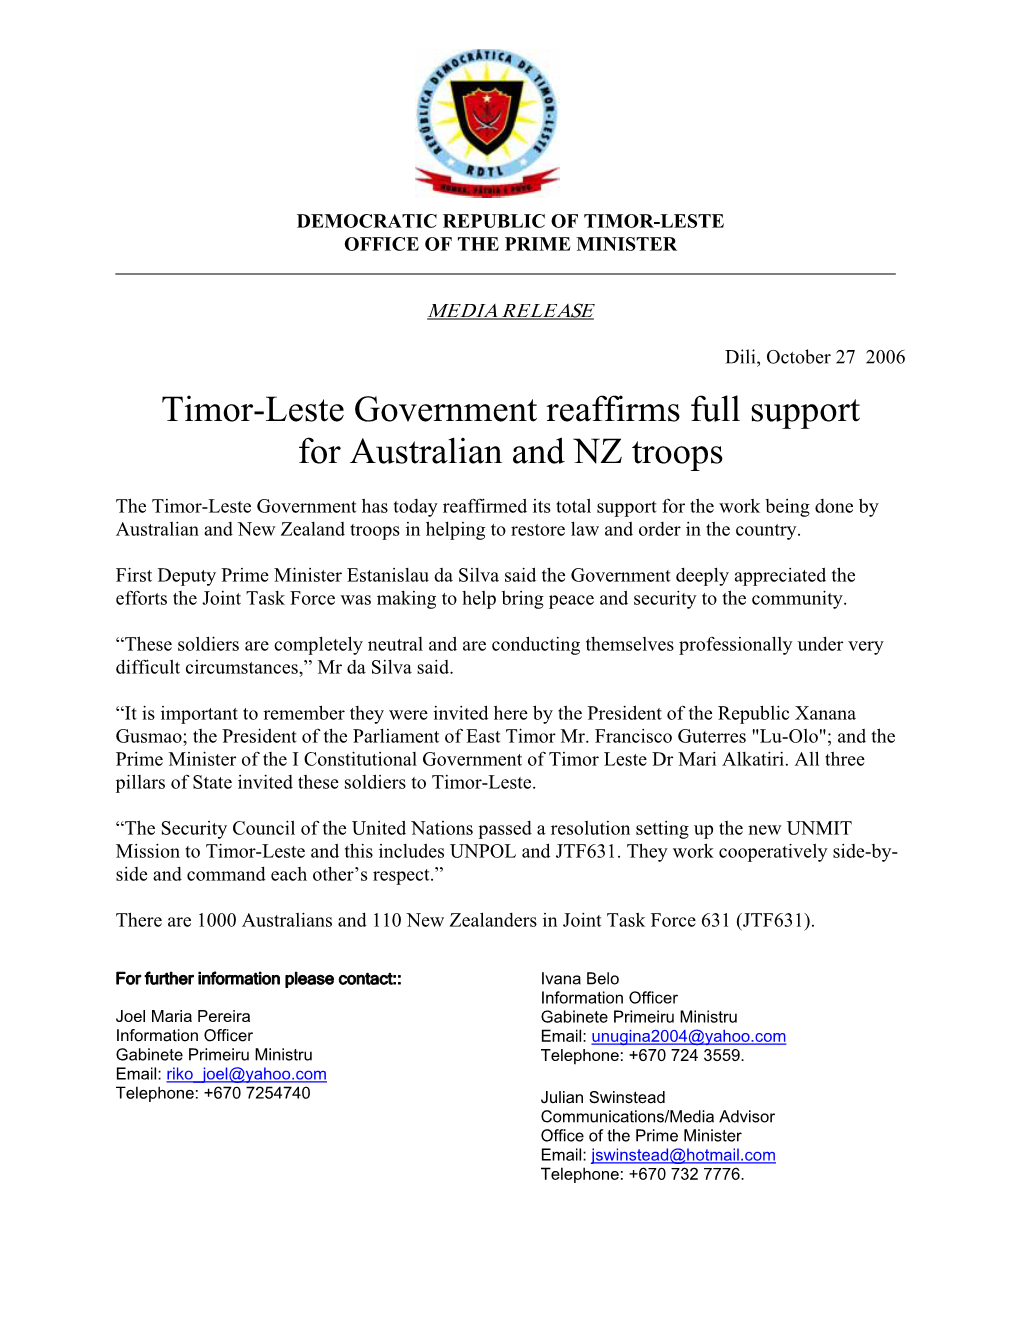 Timor-Leste Government Reaffirms Full Support for Australian and NZ Troops